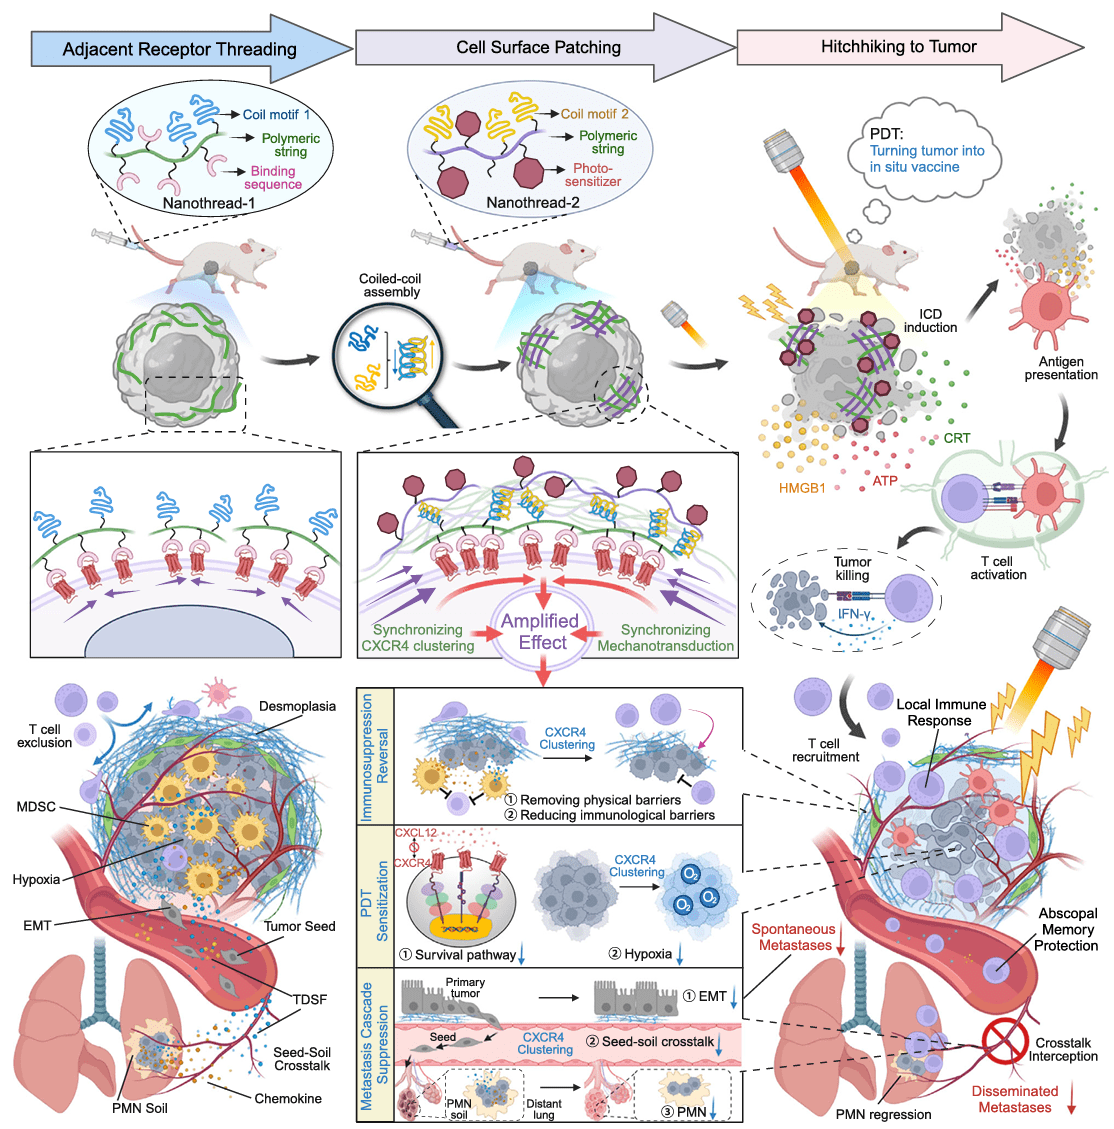 Schematic diagram of network cross-linking CXCR4 receptor strategy combined with photodynamic therapy to inhibit spontaneous metastatic tumors and disseminated metastatic tumors